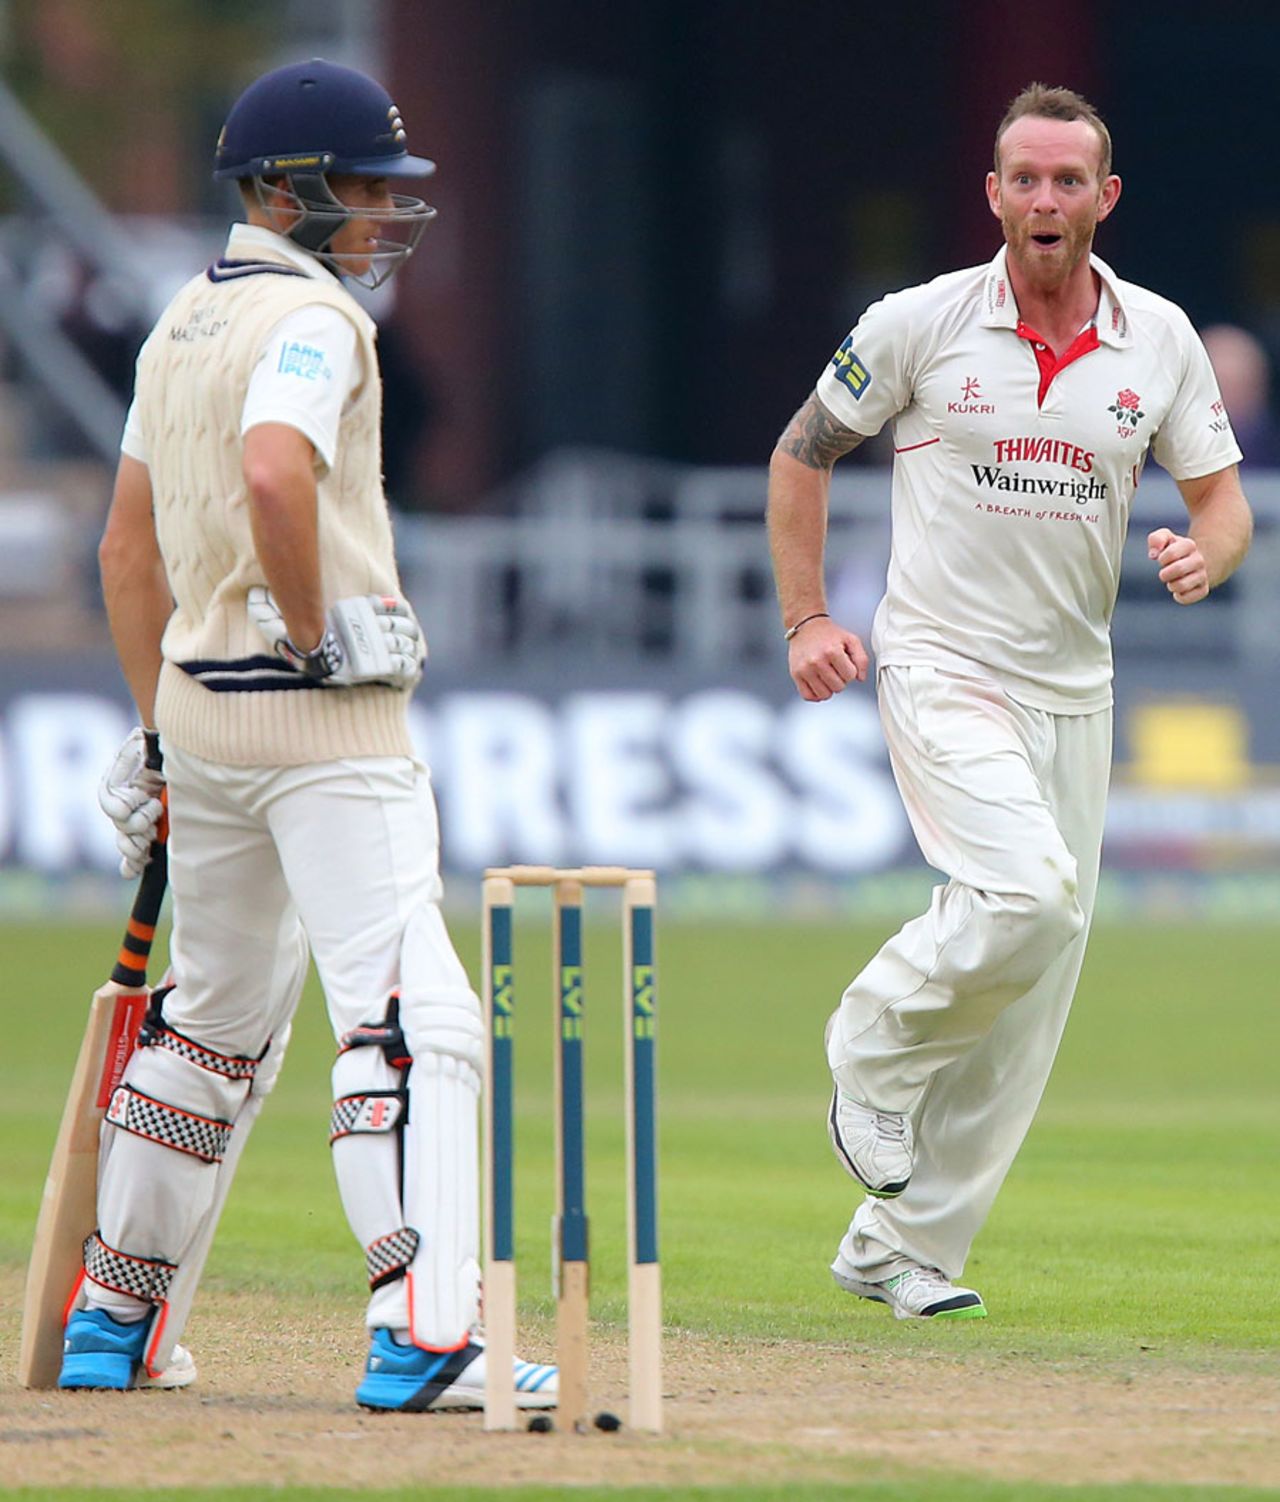 Luke Procter caused Middlesex problems, Lancashire v Middlesex, County Championship, Division One, Old Trafford, September 23, 2014